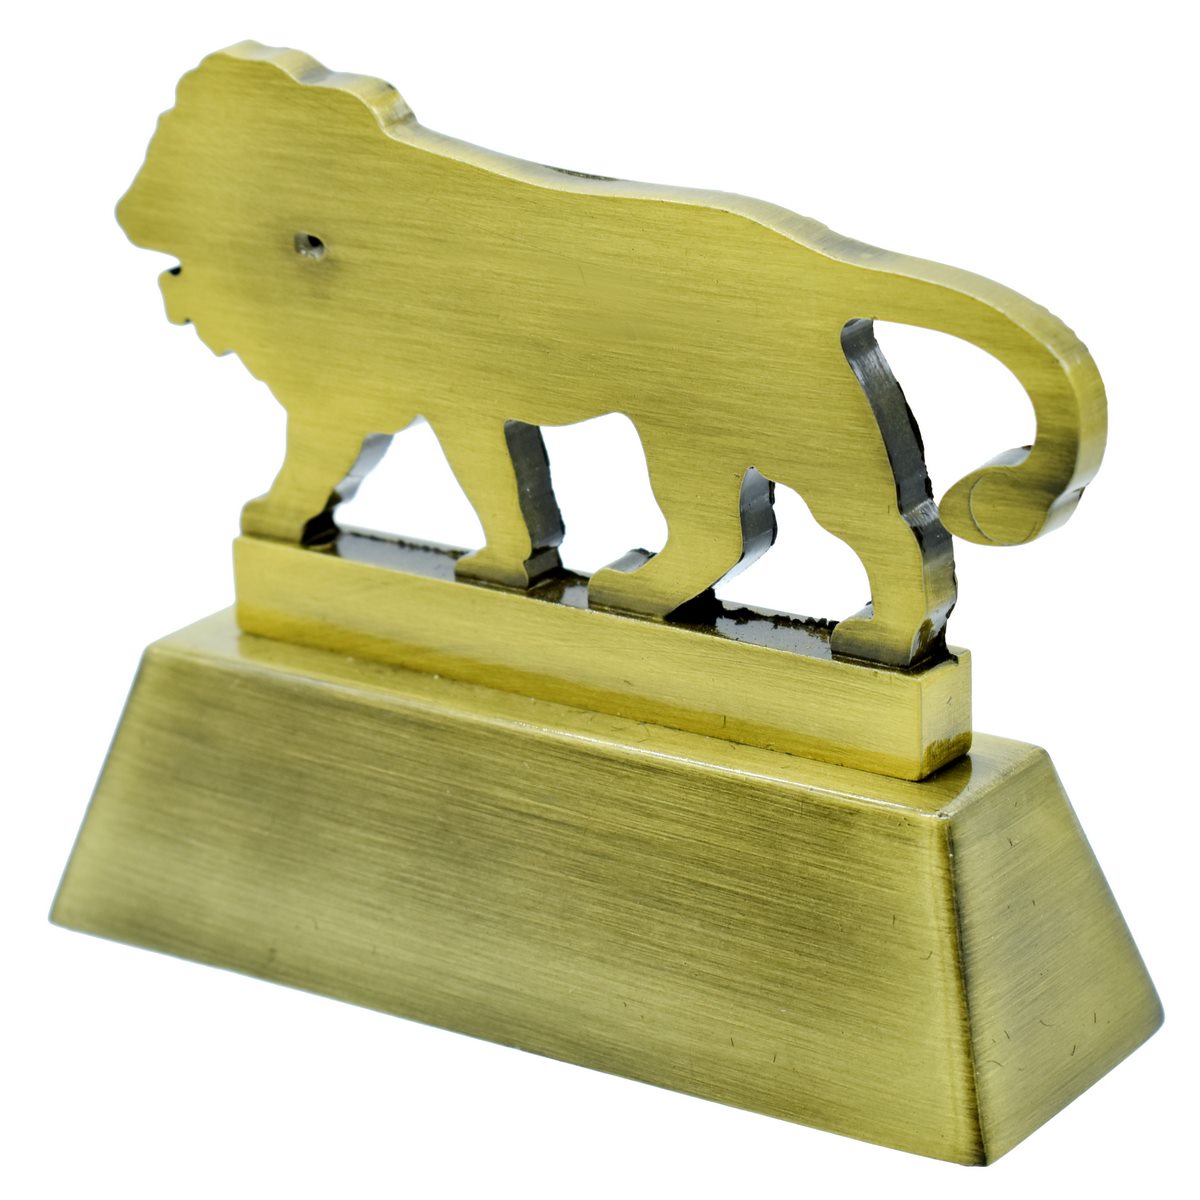 Make in India Paper Weight - For Corporate Gifting, Events Promotional Freebie - JA